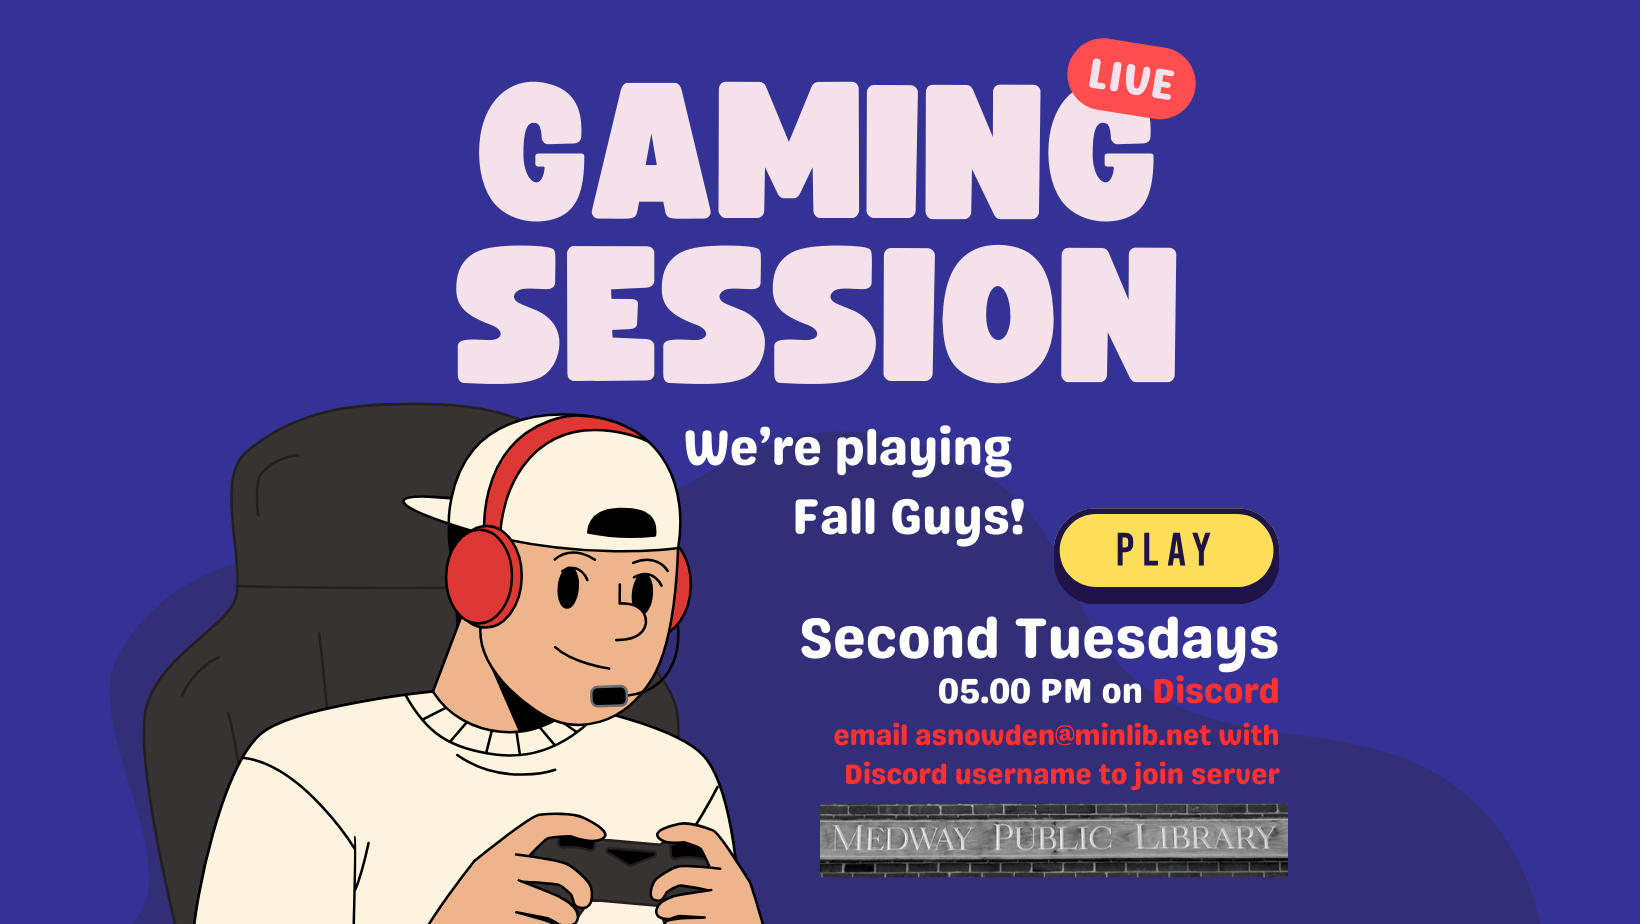 Discord Gaming second Tuesdays at 5